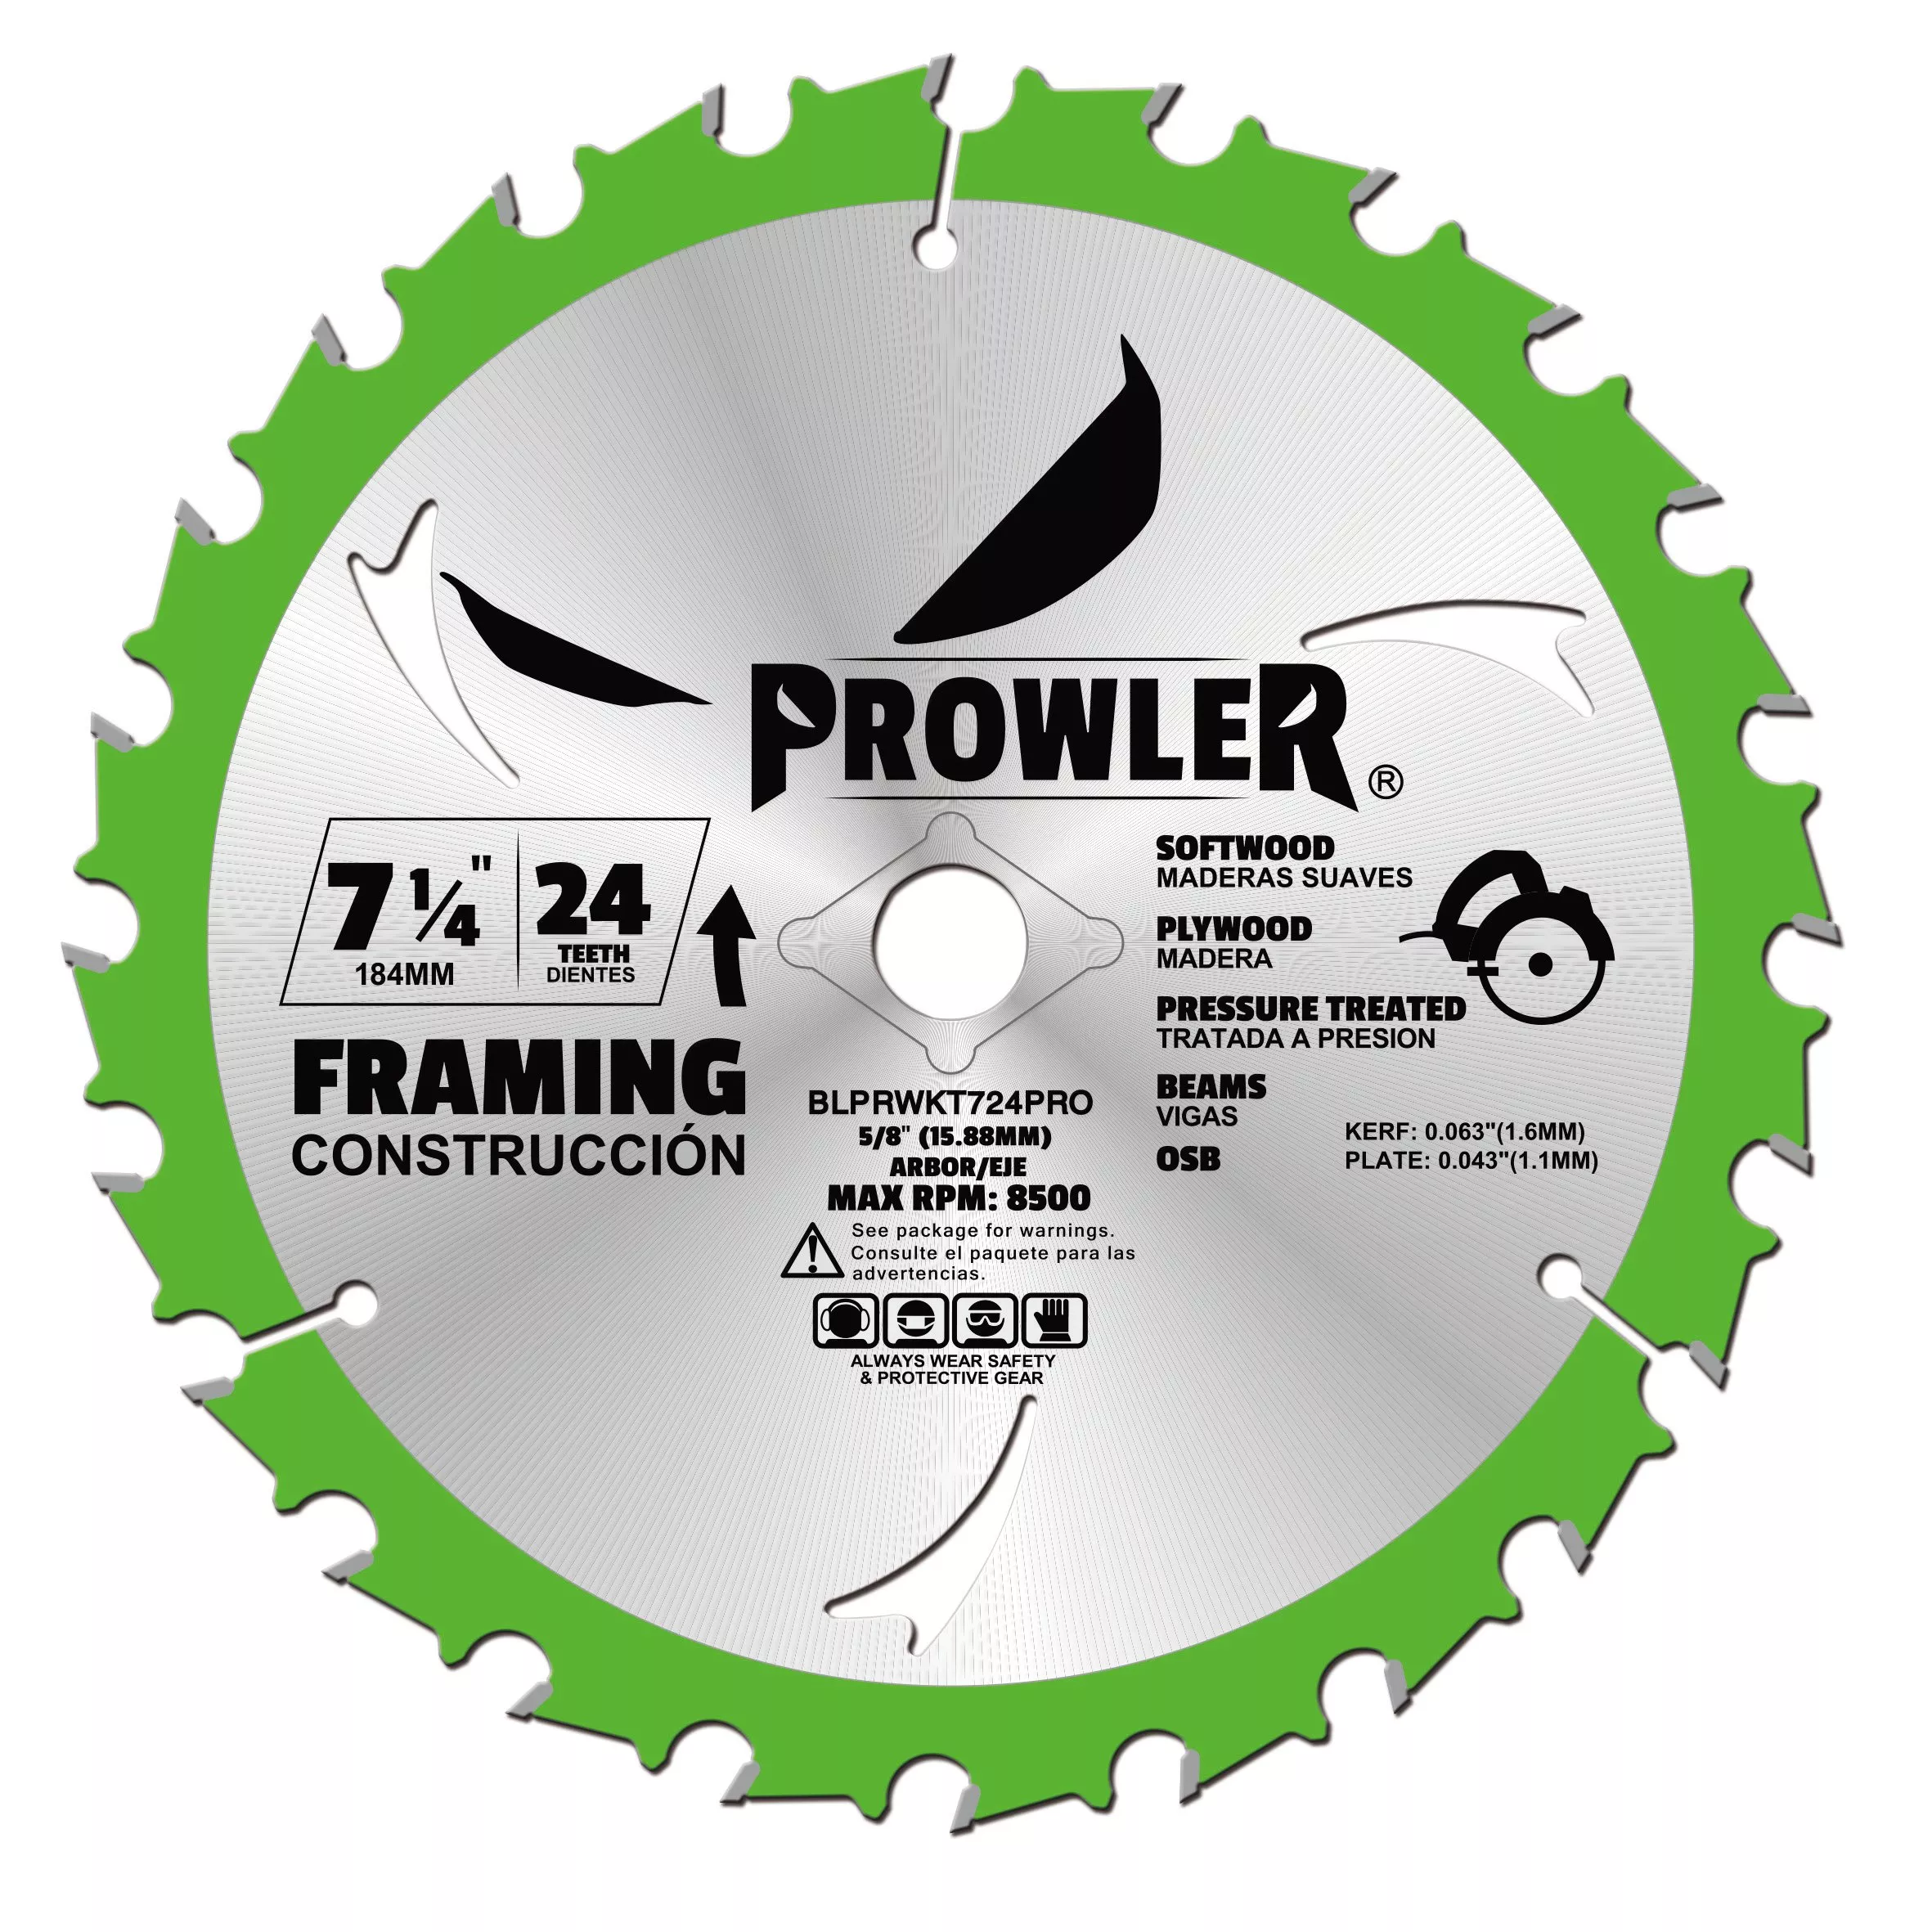 Prowler 7 1/4in. 24T Wood Blade 2-pack